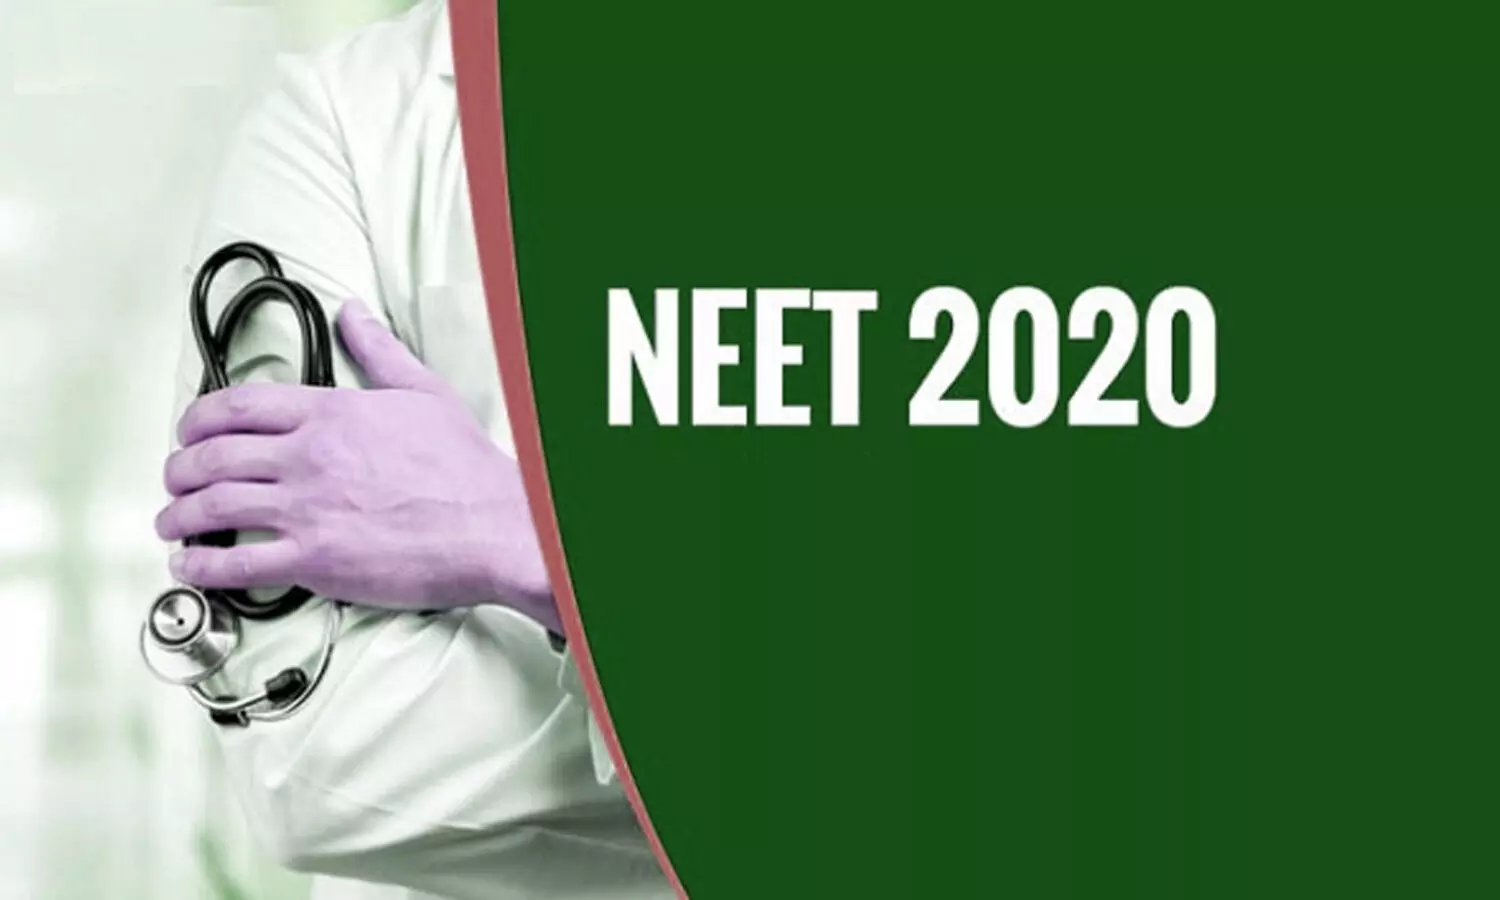 NEET 2020: Health Ministry Releases SOP for conducting Exams amid COVID-19